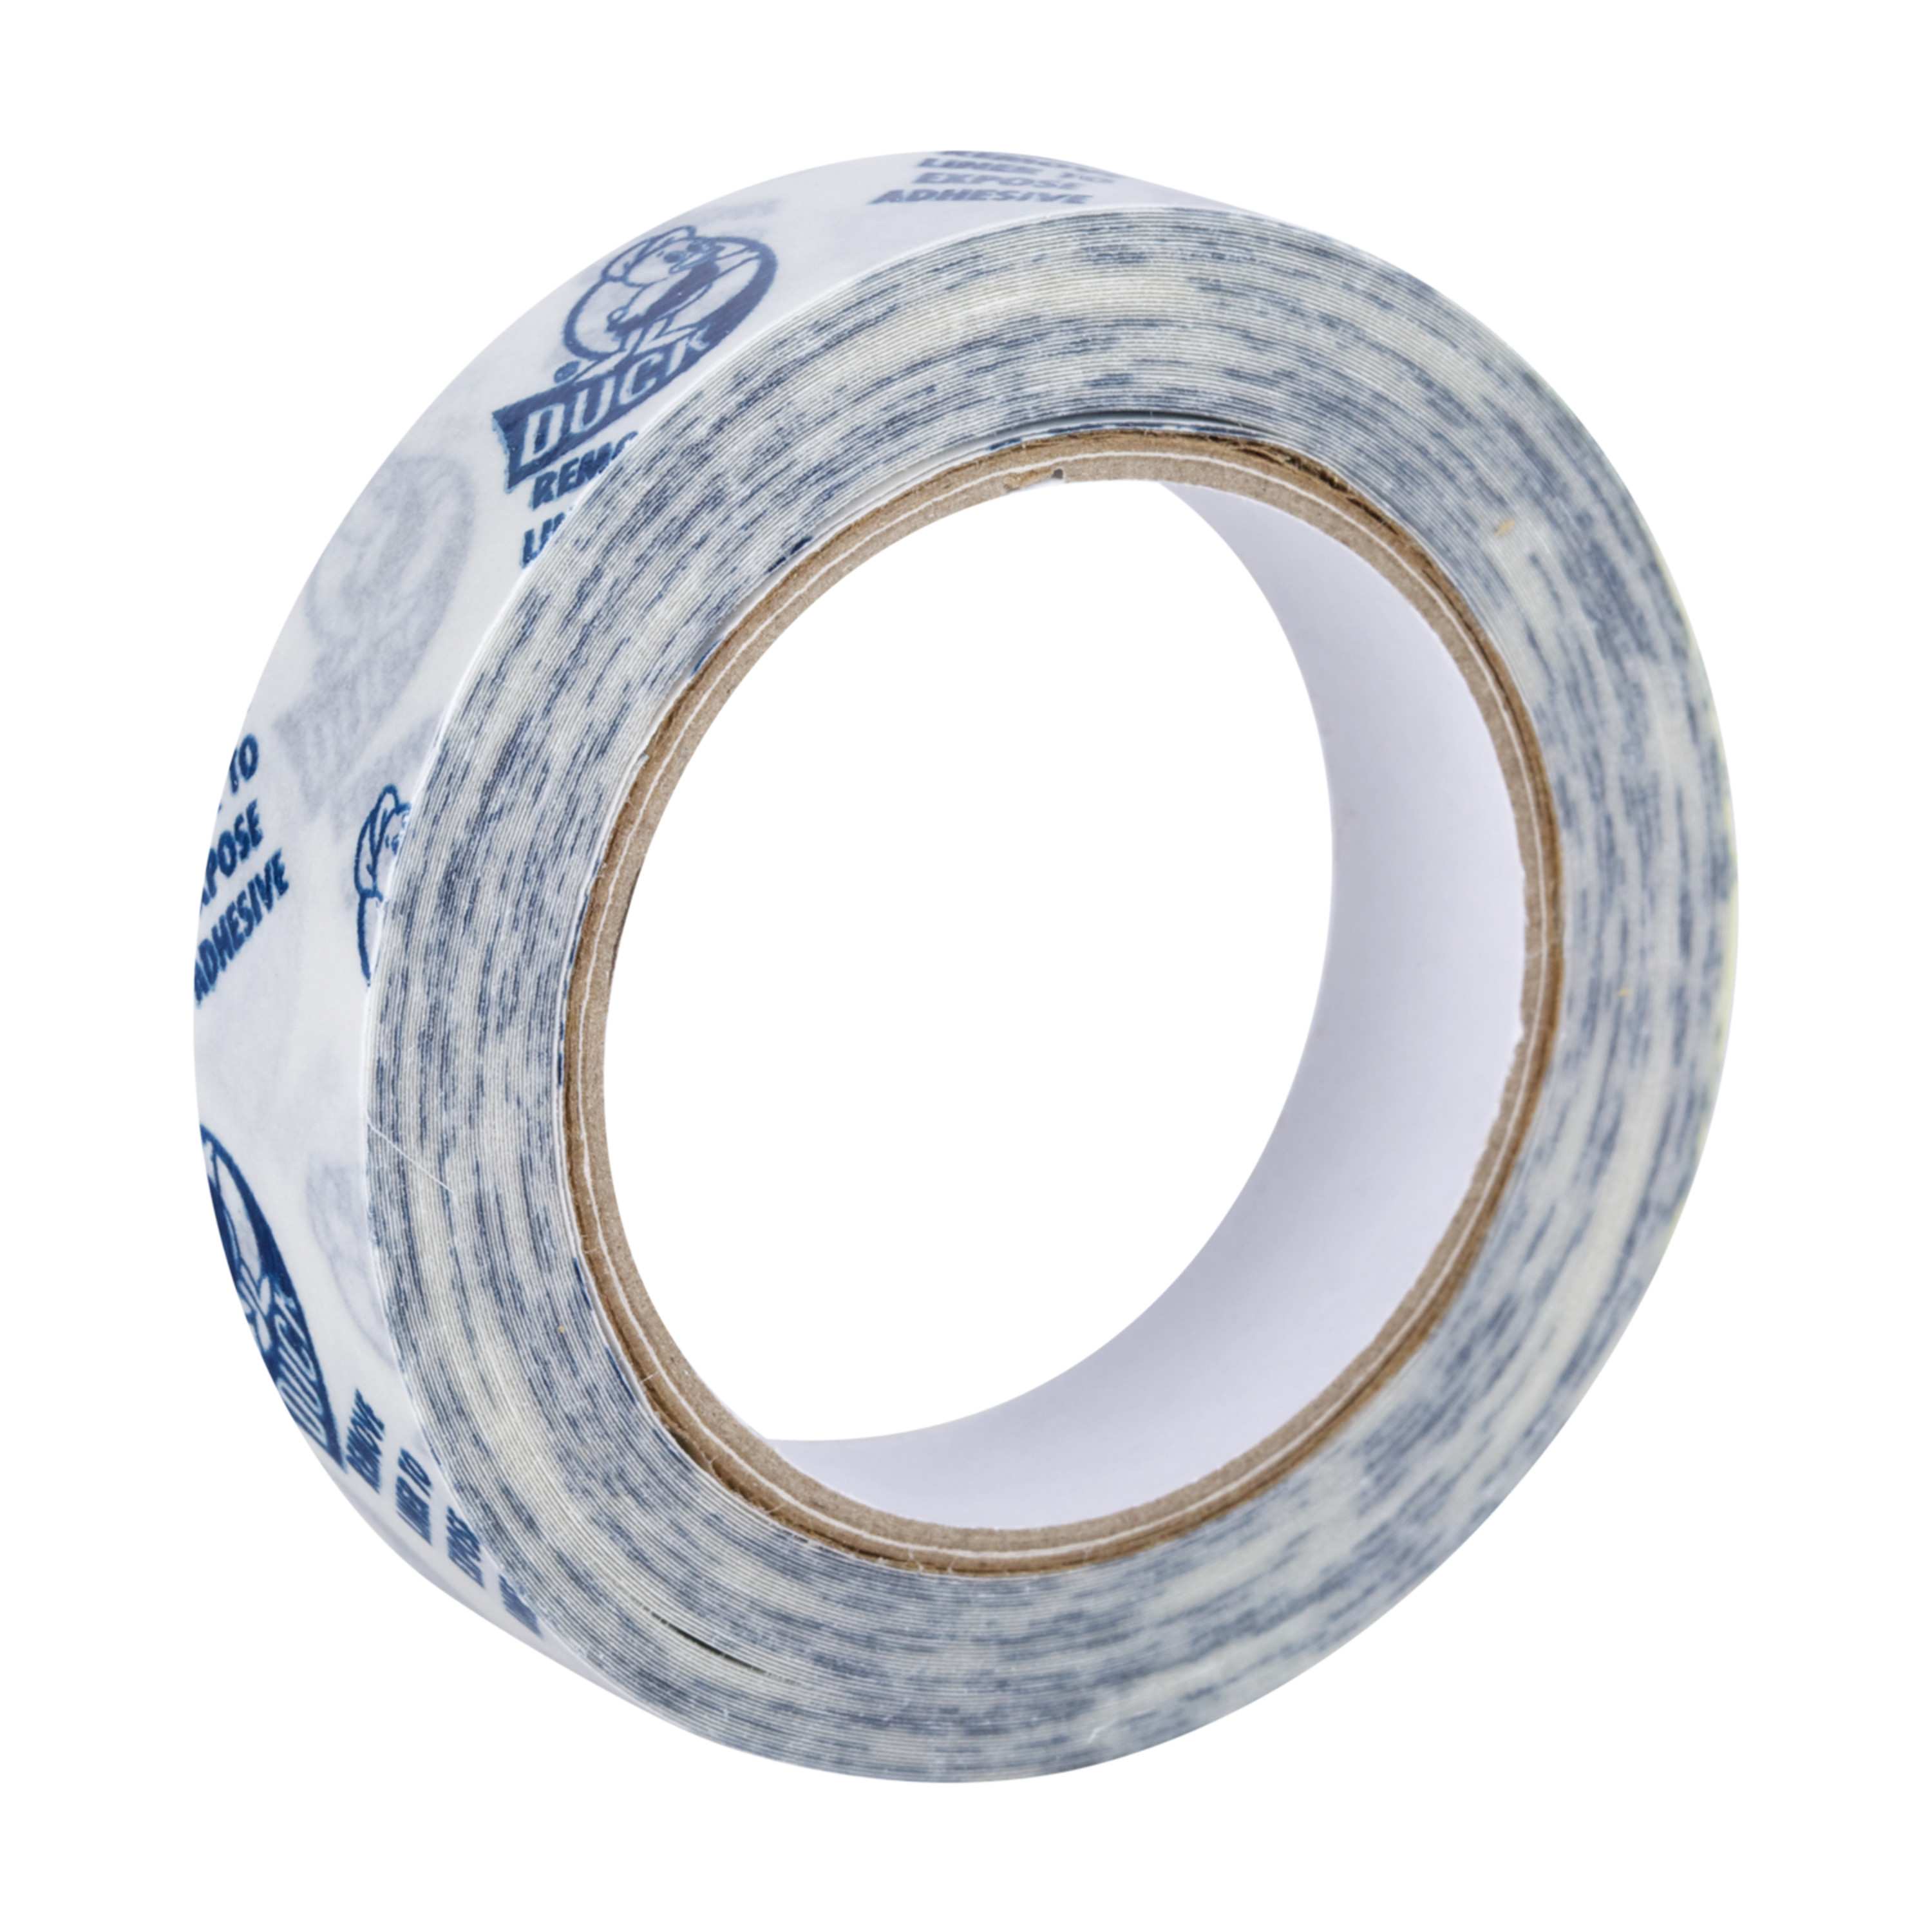 Duck Brand Clear Double-Sided Indoor Window Kit Tape, .25 in. x 24 ft. - image 3 of 10